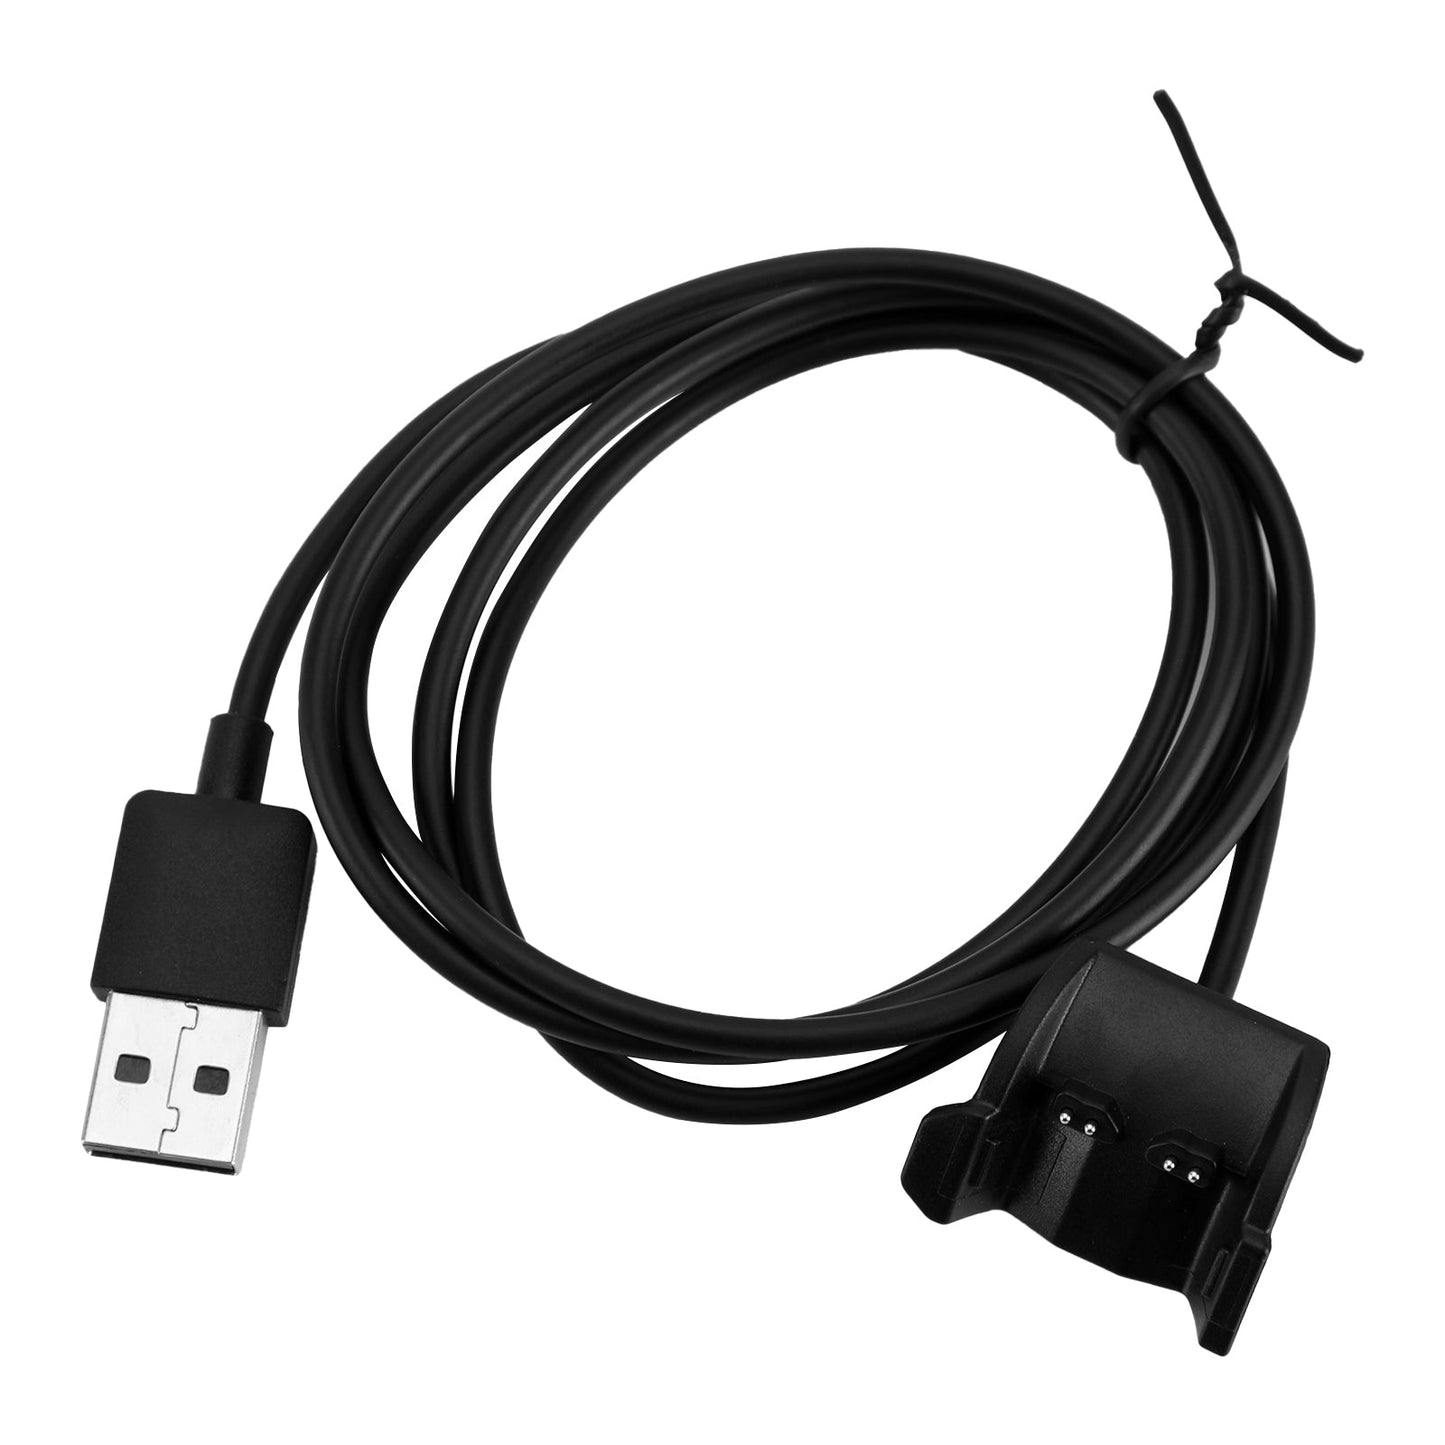 USB Charger Charging Data Cable Cord Fit for Garmin Vivosmart HR/HR+ Watch